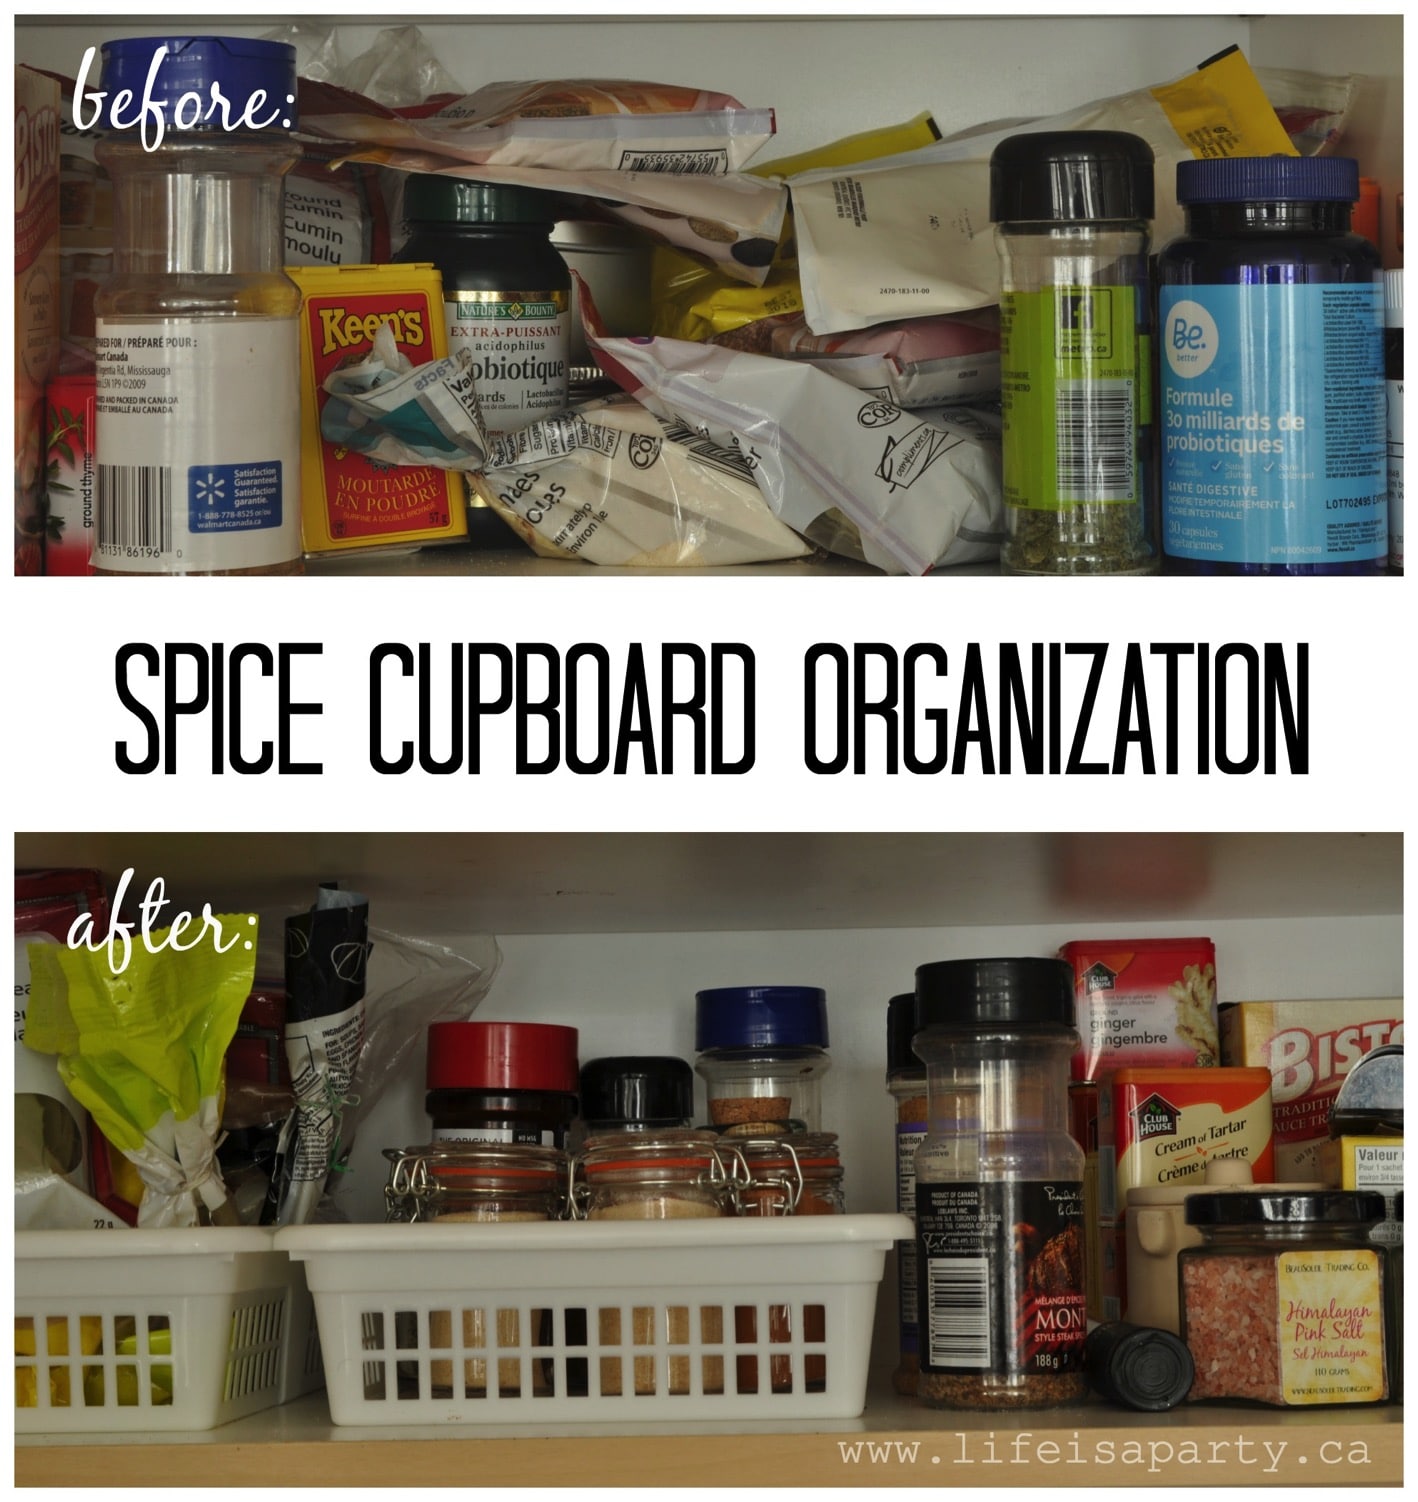 Spice Cupbard Organization: Easy tips to get the spice packages organized and under control so you can find what you need when you need it.